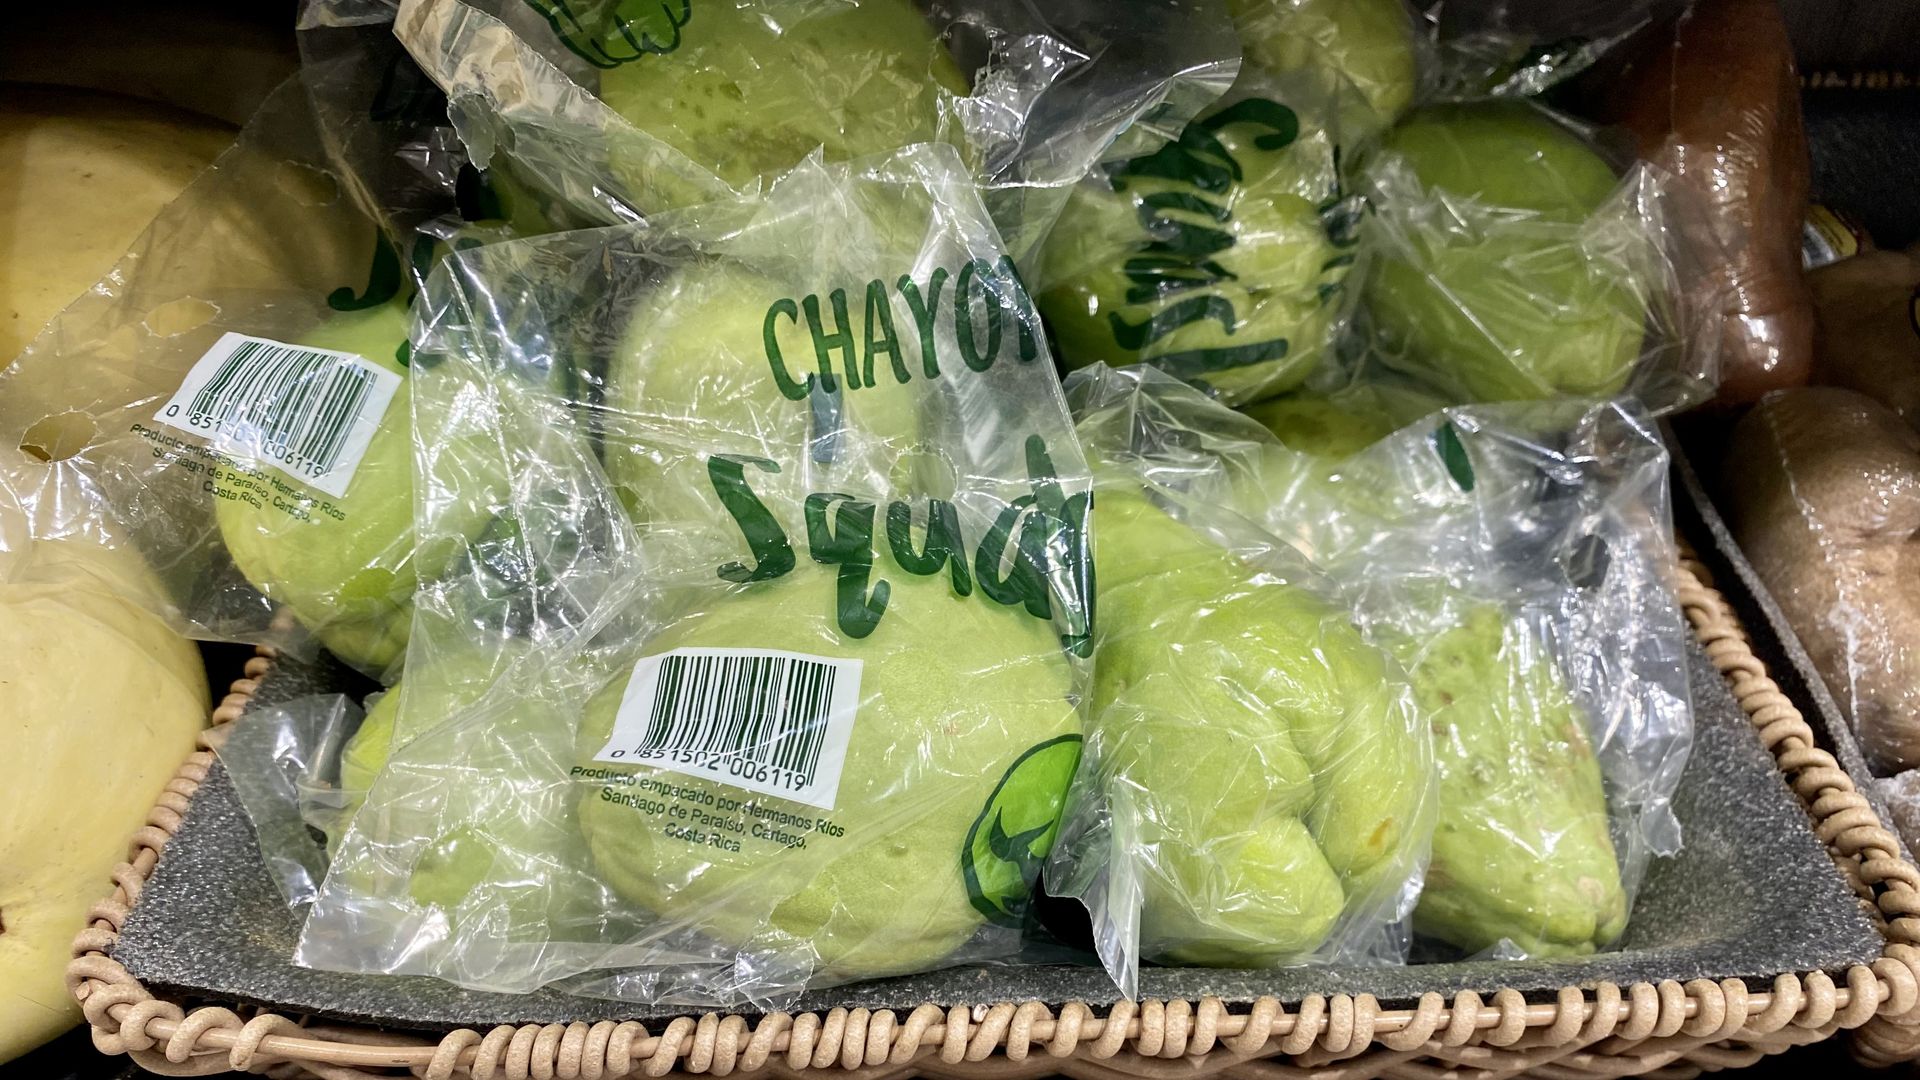 A basket of Chayote at Publix.